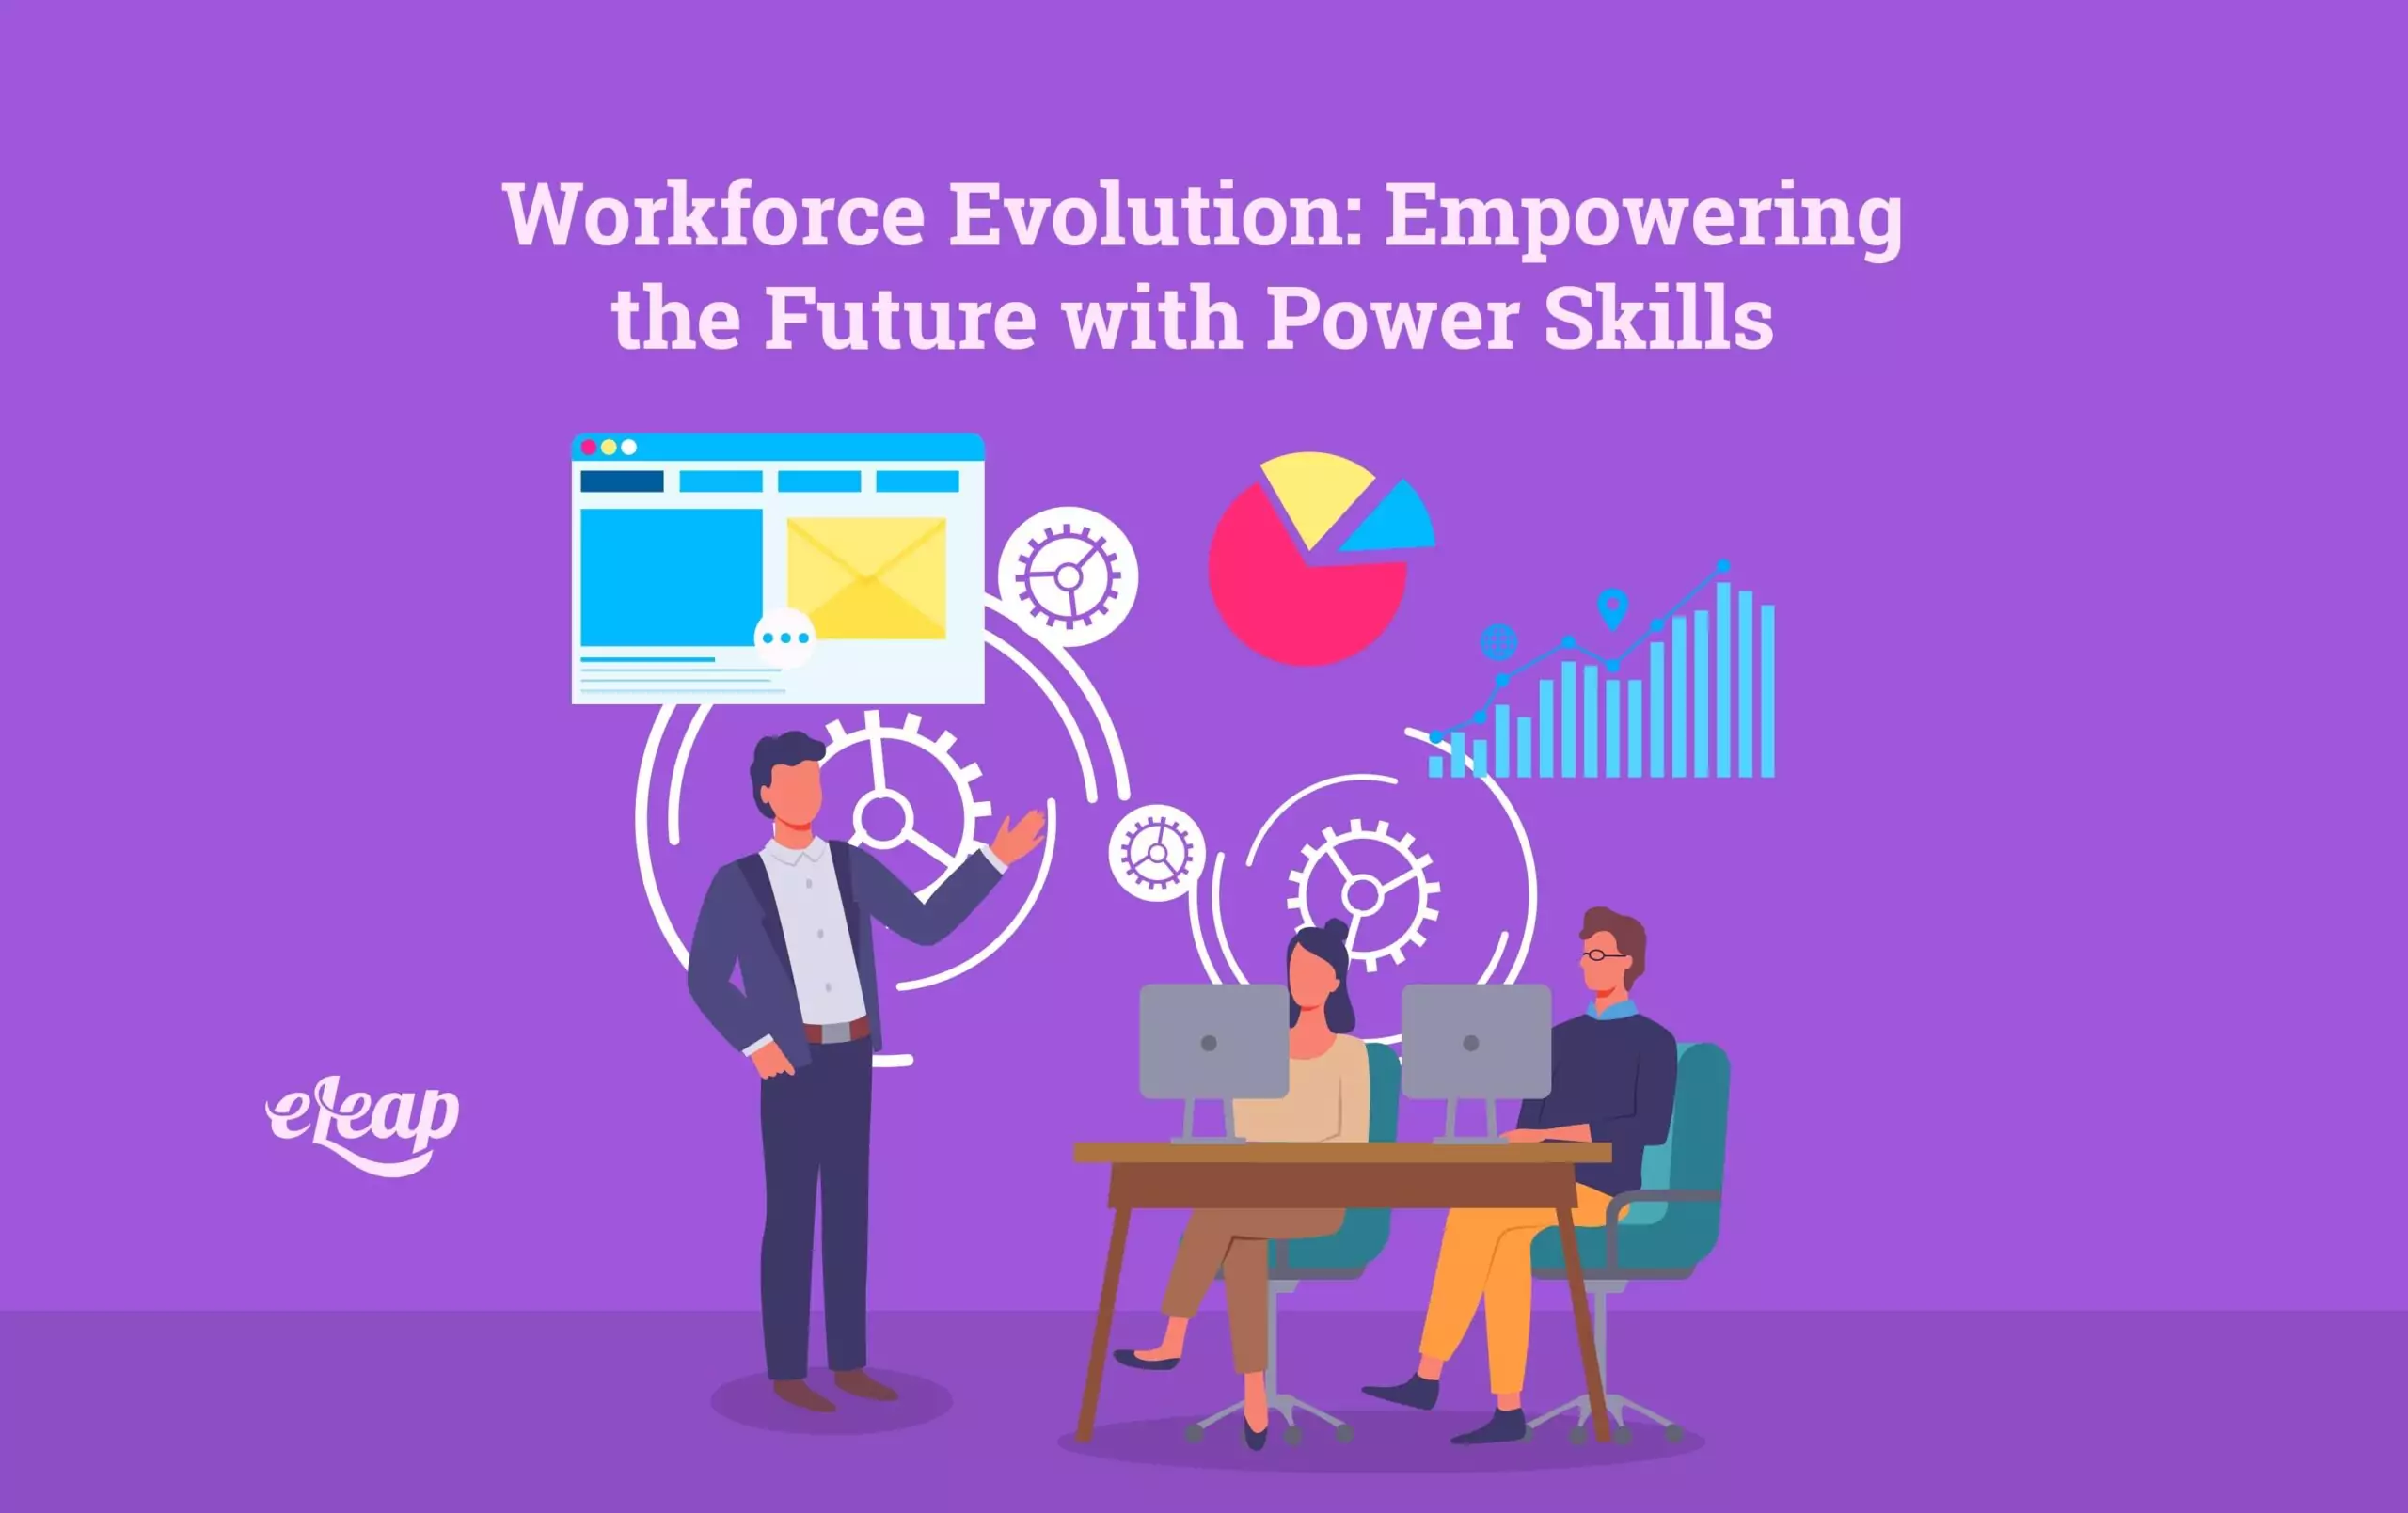 Workforce Evolution: Empowering the Future with Power Skills